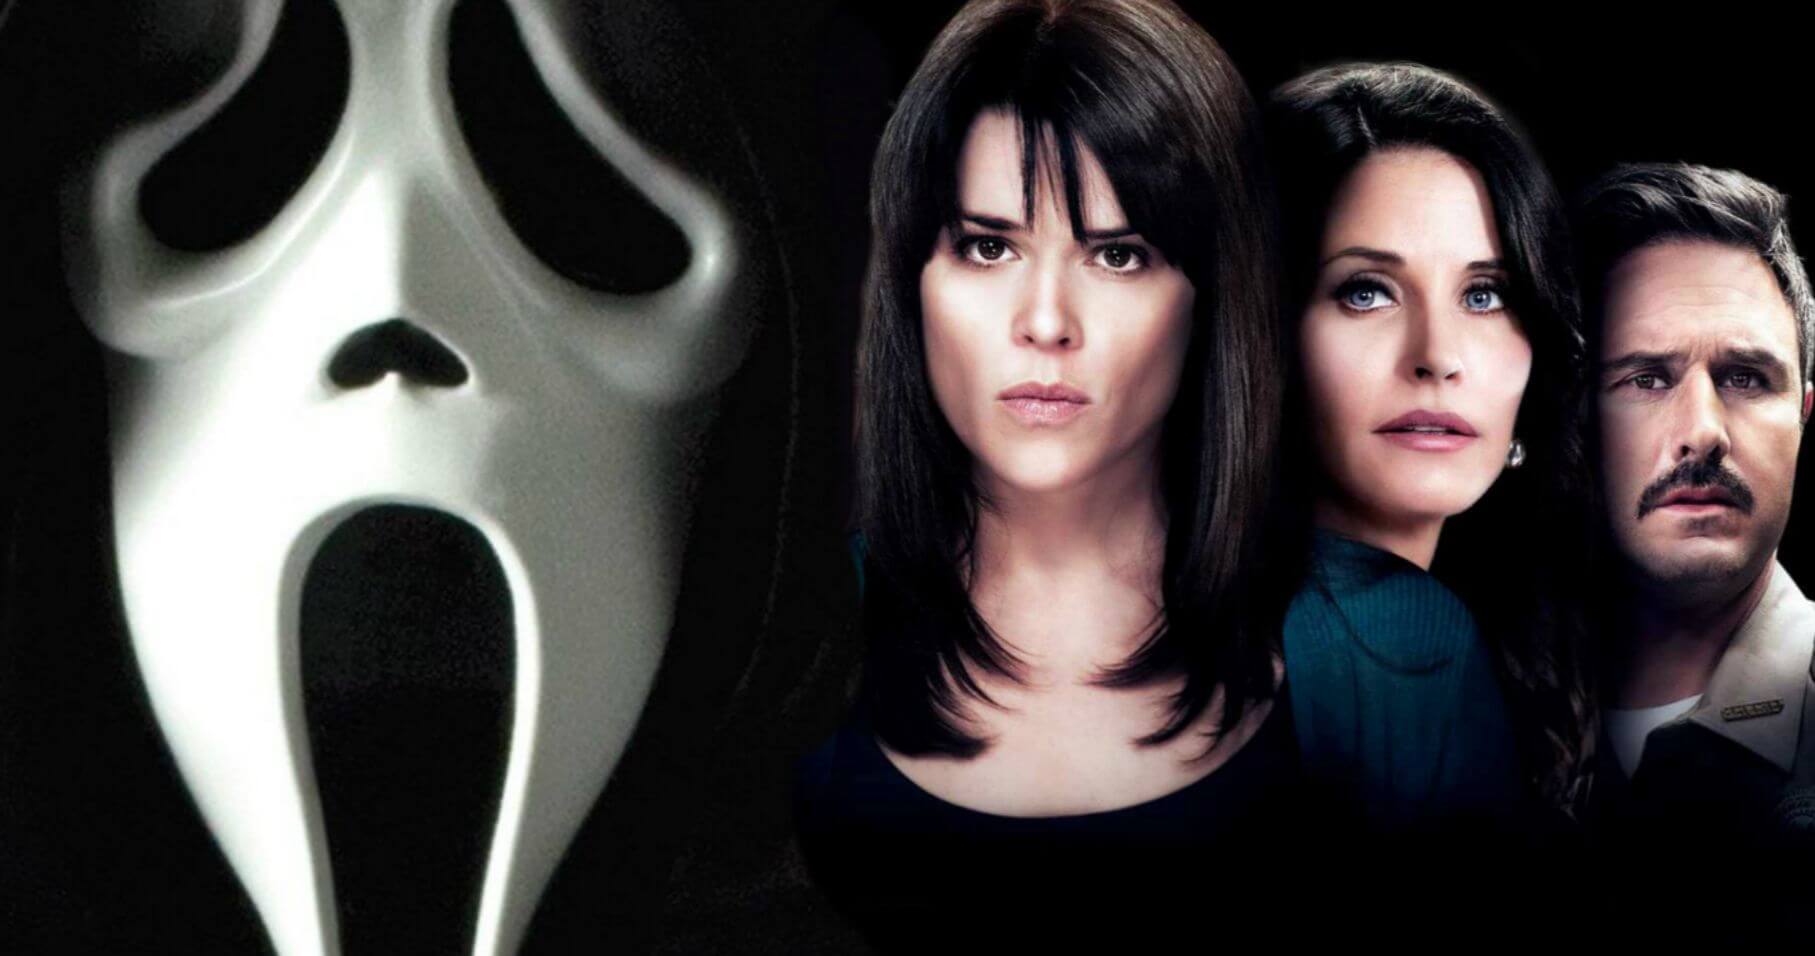 Who Is Playing Ghostface In Scream 5, Clues To Find Out The Ghostface In Scream 2022